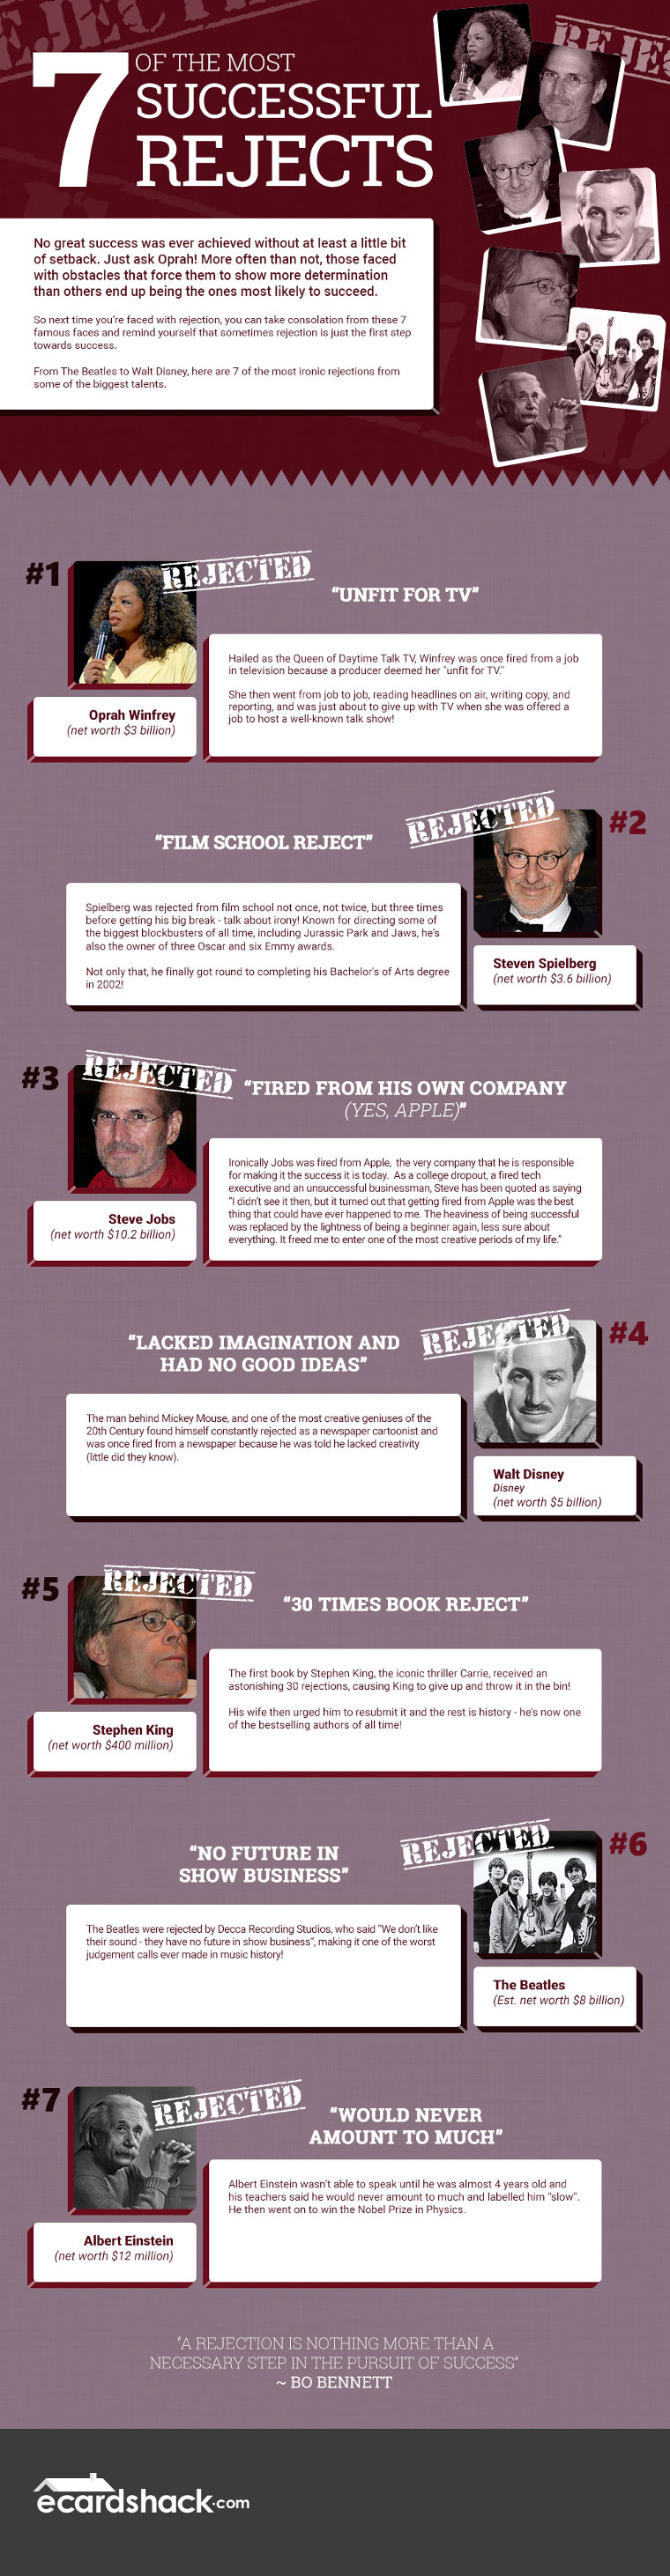 Most successful rejects - infographic by eCardShack.com